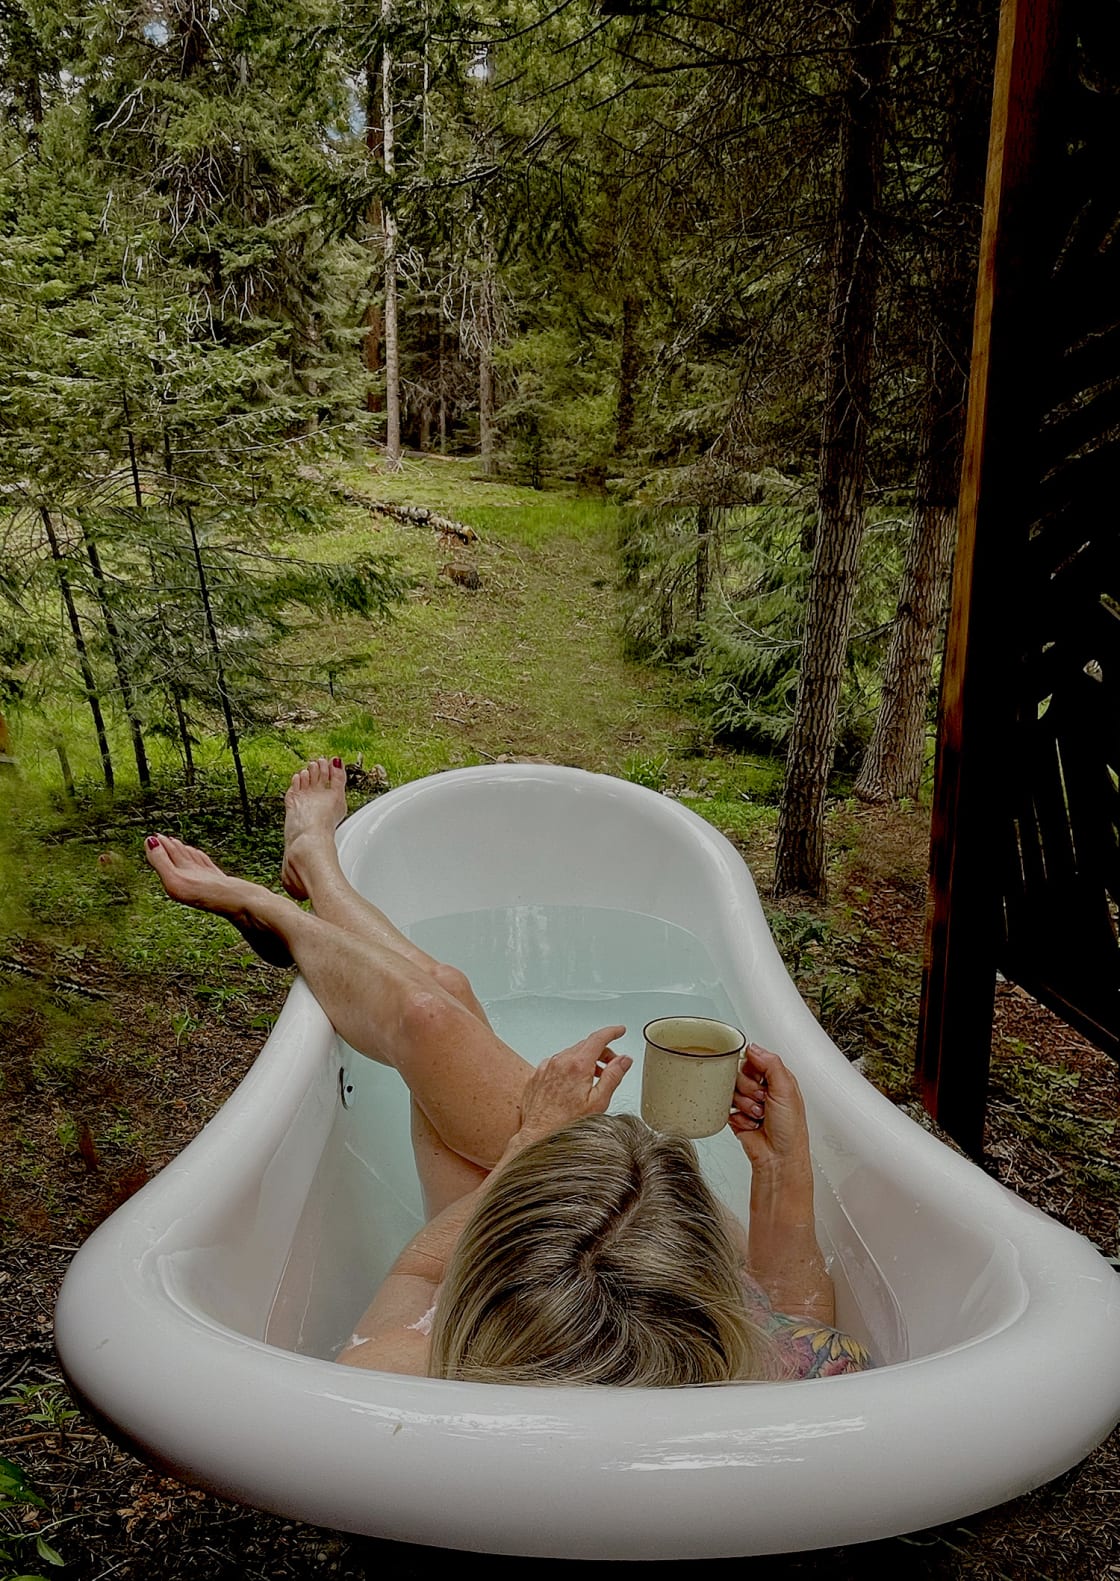 Seasonal outdoor tub - June through October. Relax outdoors in a private outdoor clawfoot tub with plenty of hot water.
Photo by Mary La 2022